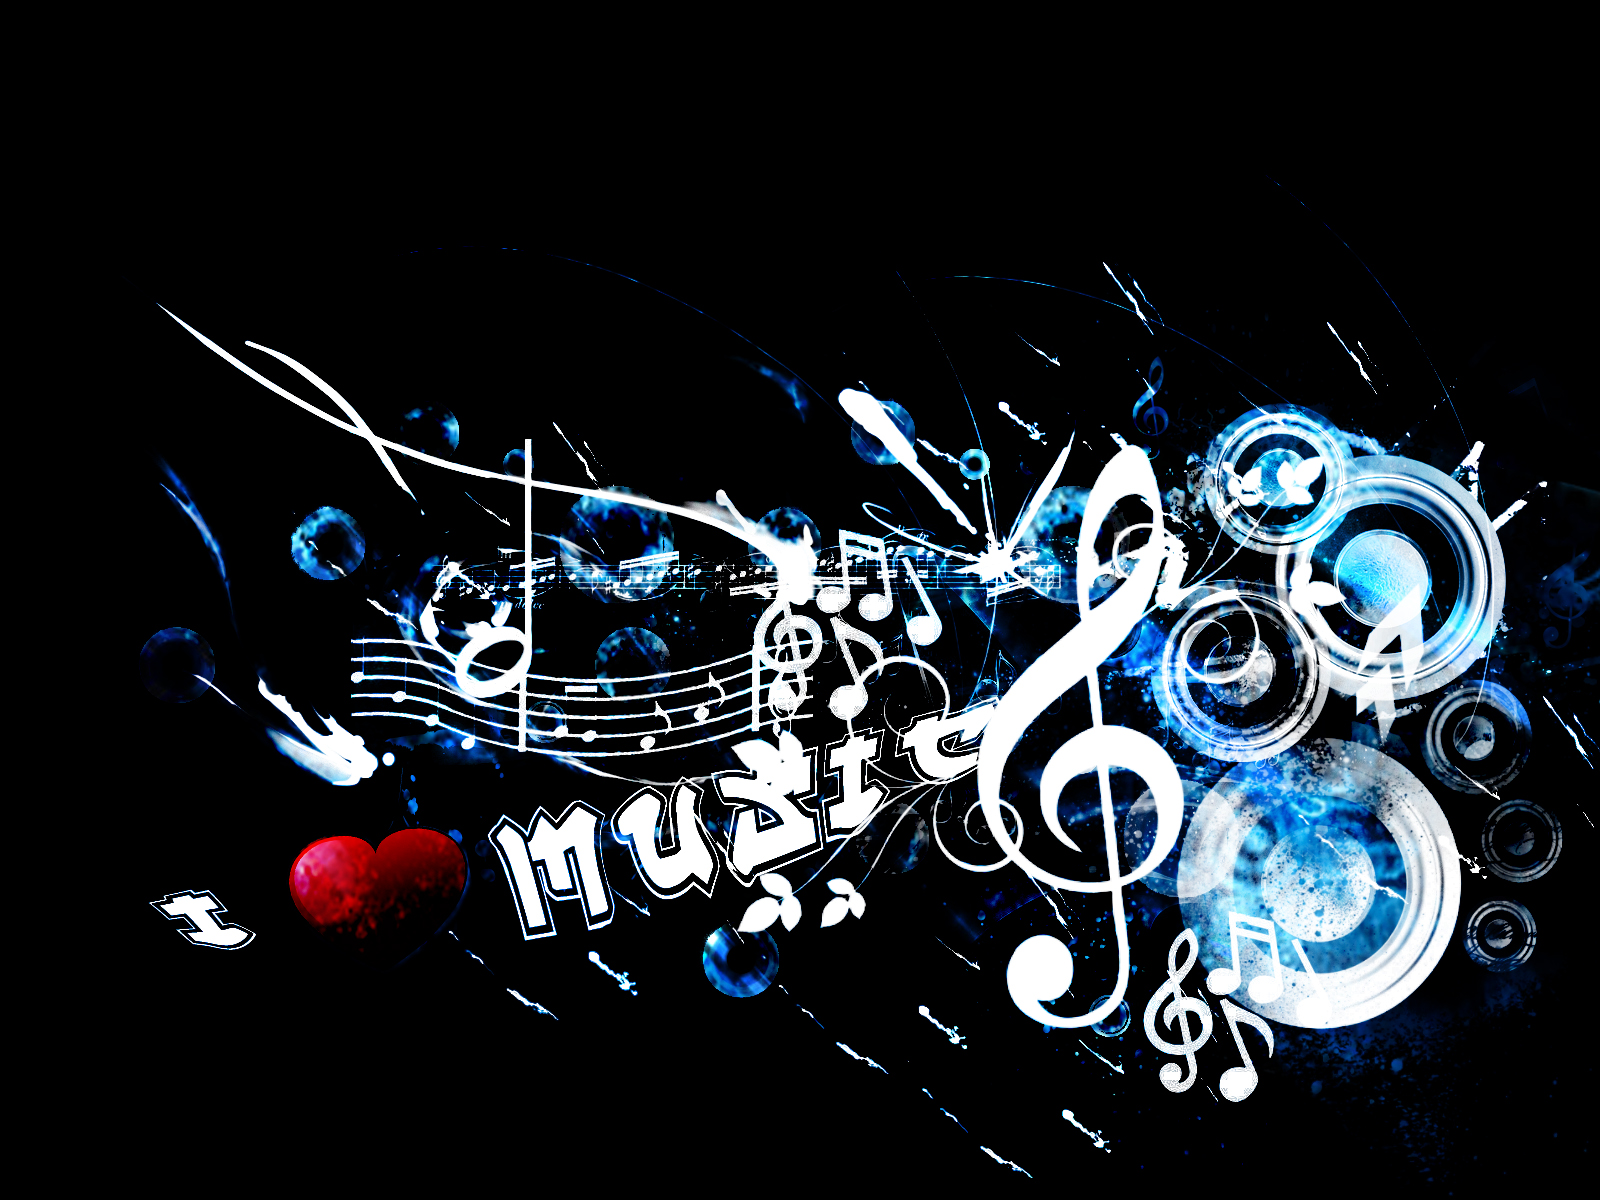 Wallpaper Wiki Love Music Art Abstract Black Background Image HD